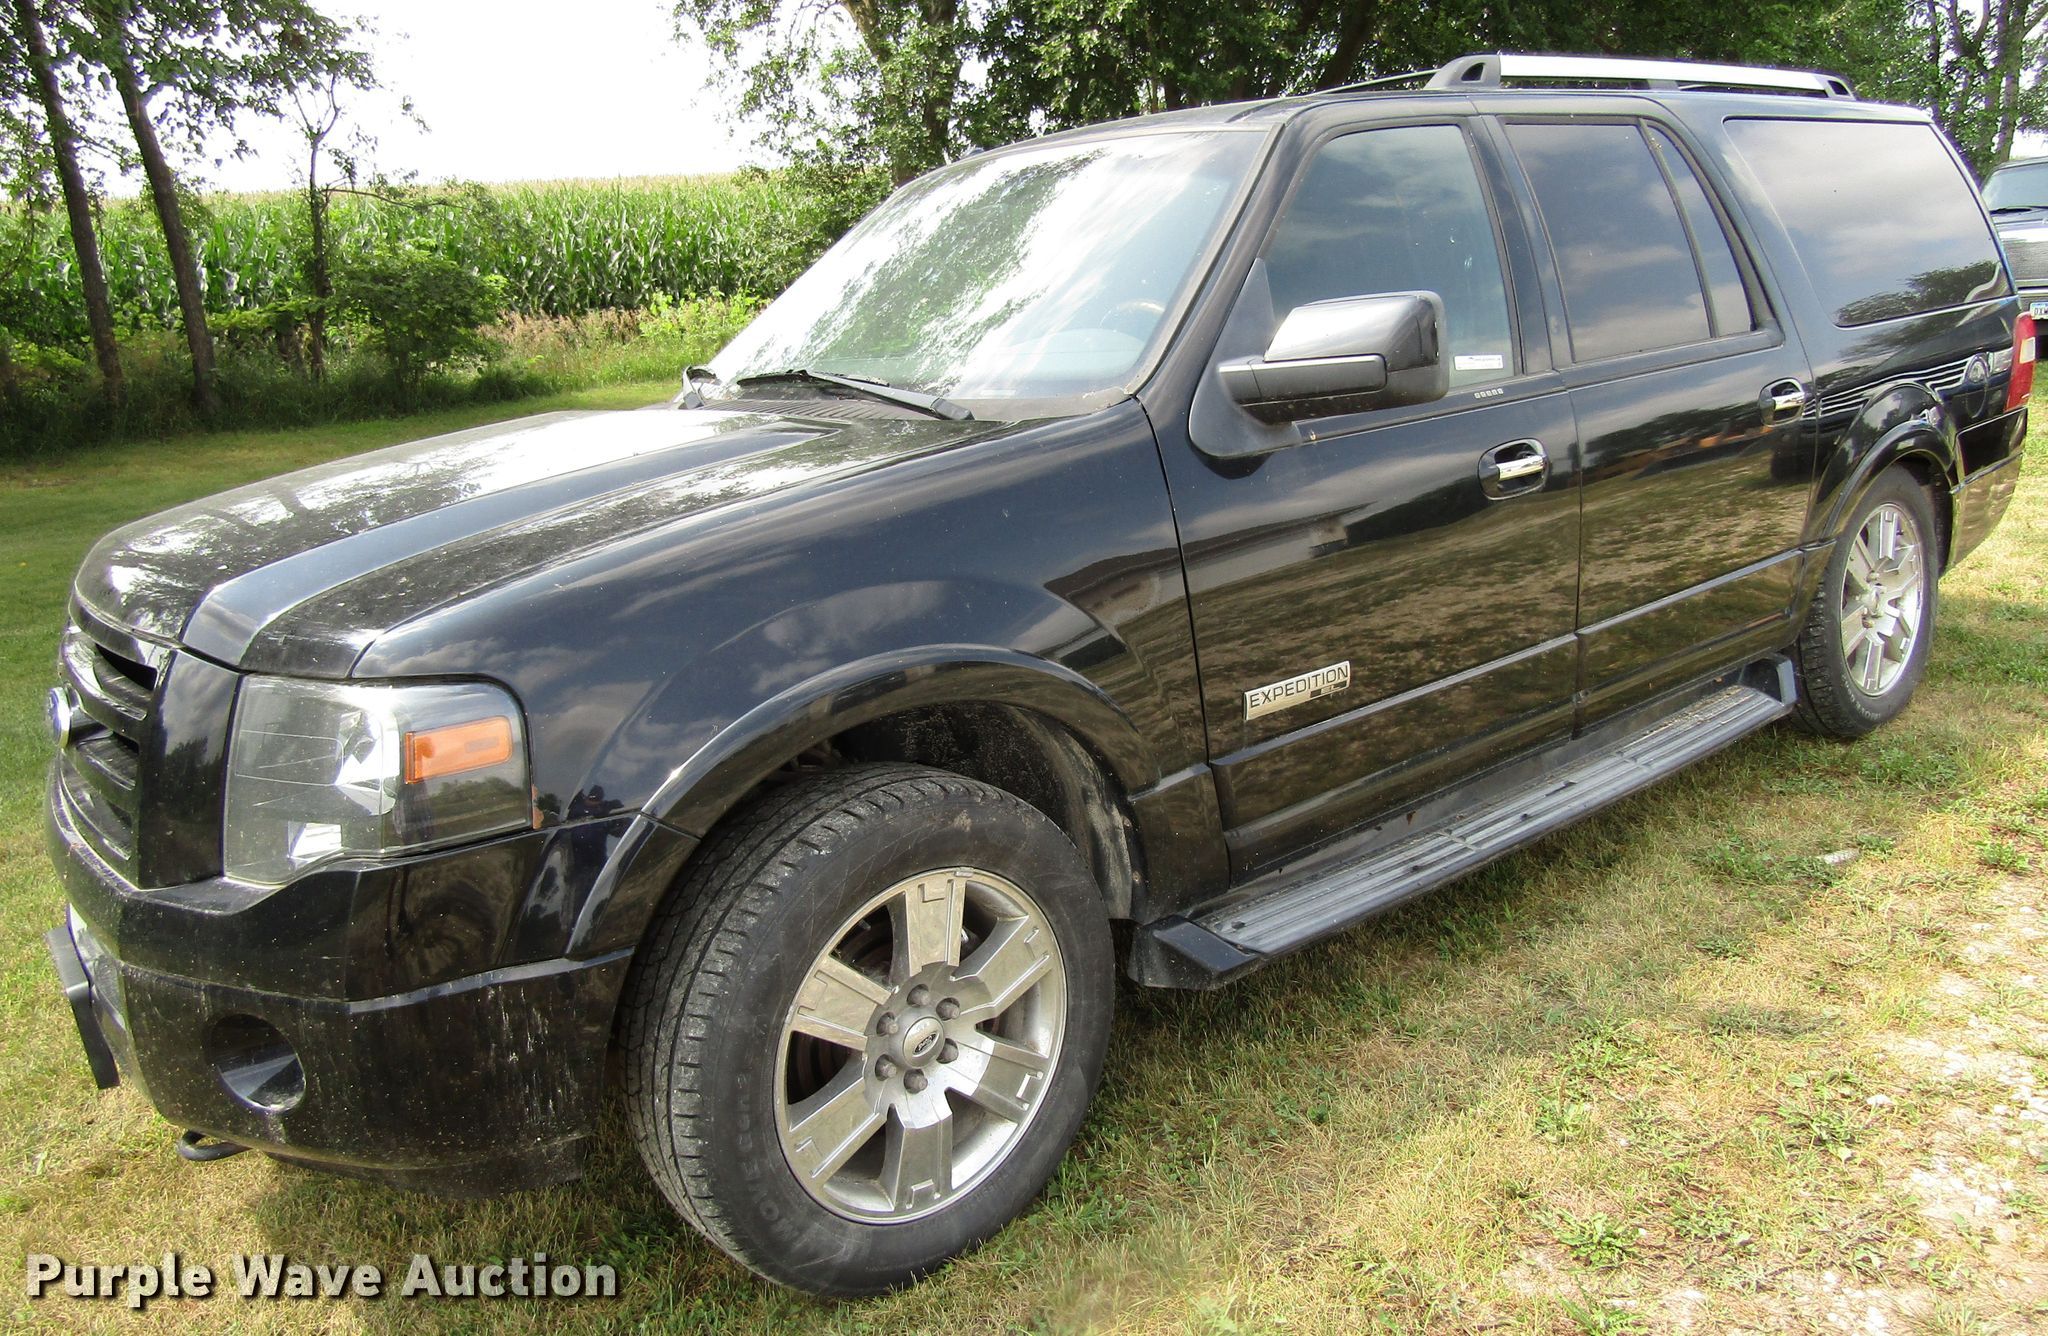 2007 Ford Expedition EL Limited SUV in Central City, IA | Item EV9292 sold  | Purple Wave